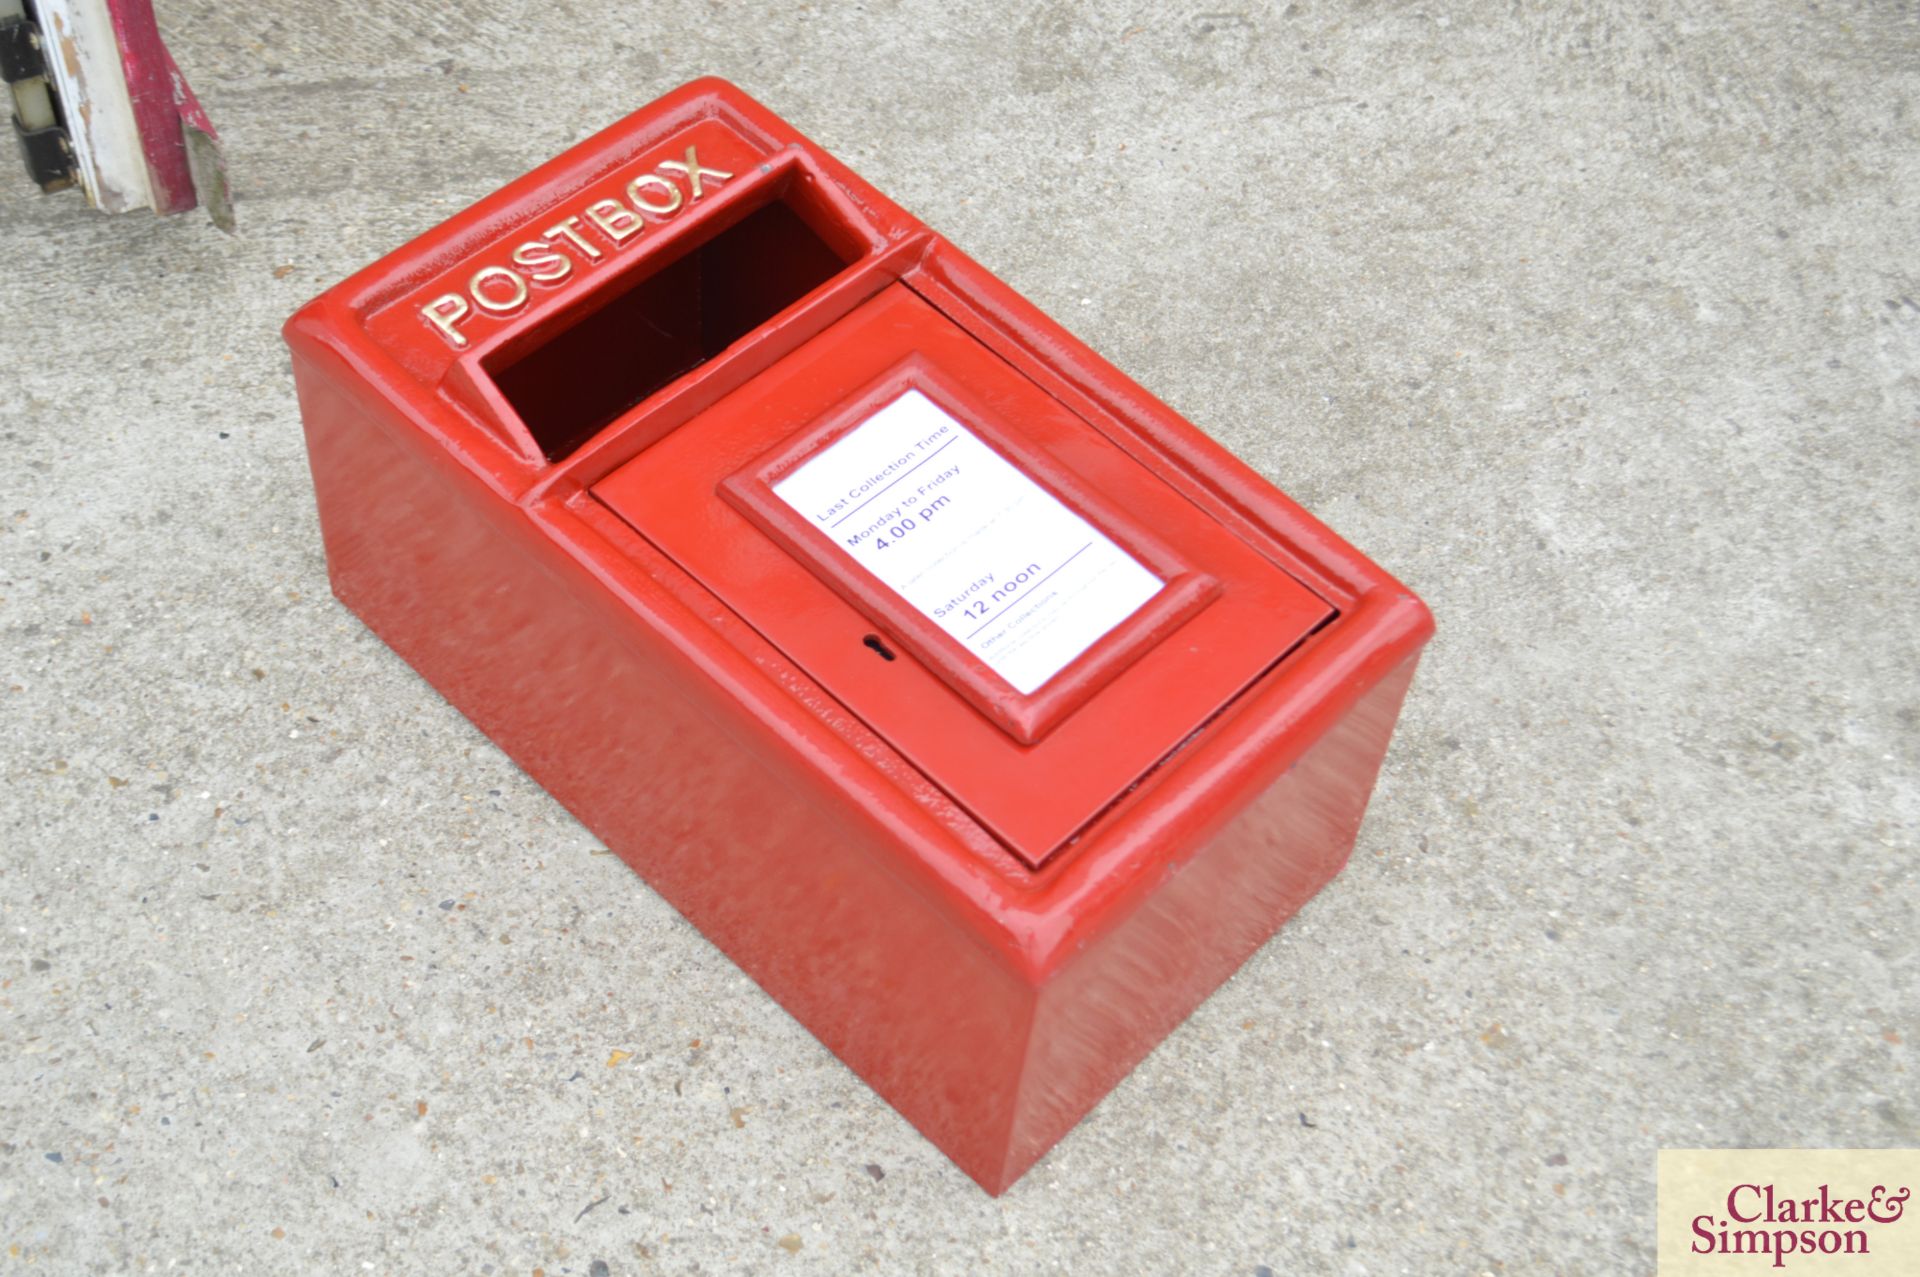 Red postbox 200mm deep.*